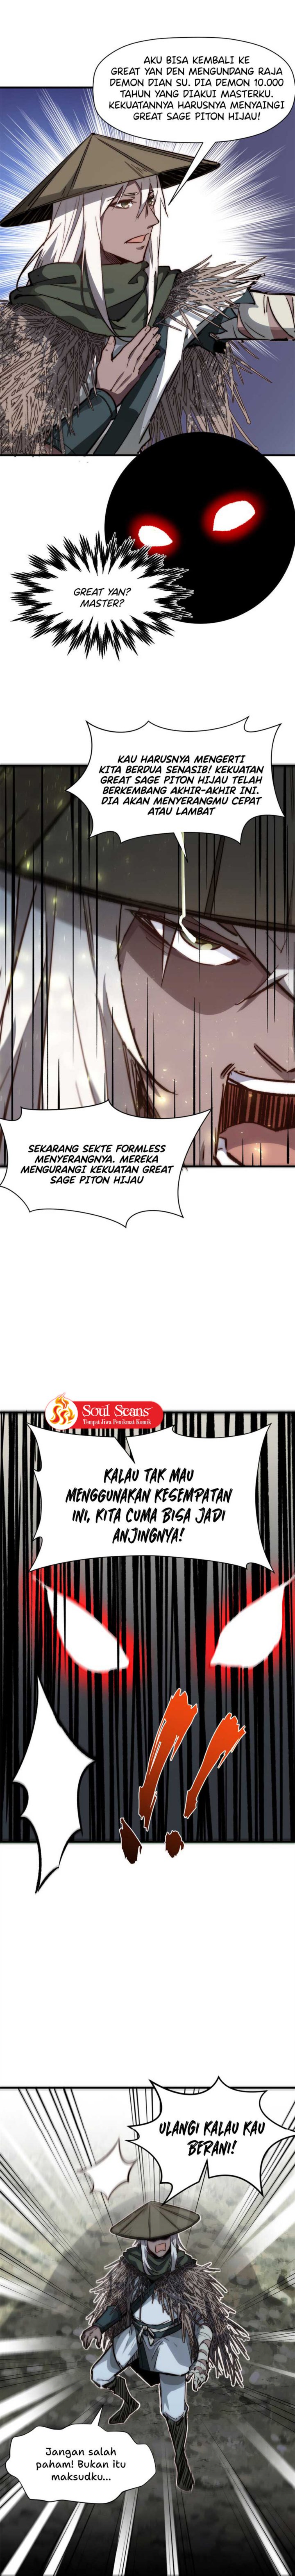 Dilarang COPAS - situs resmi www.mangacanblog.com - Komik top tier providence secretly cultivate for a thousand years 097 - chapter 97 98 Indonesia top tier providence secretly cultivate for a thousand years 097 - chapter 97 Terbaru 12|Baca Manga Komik Indonesia|Mangacan